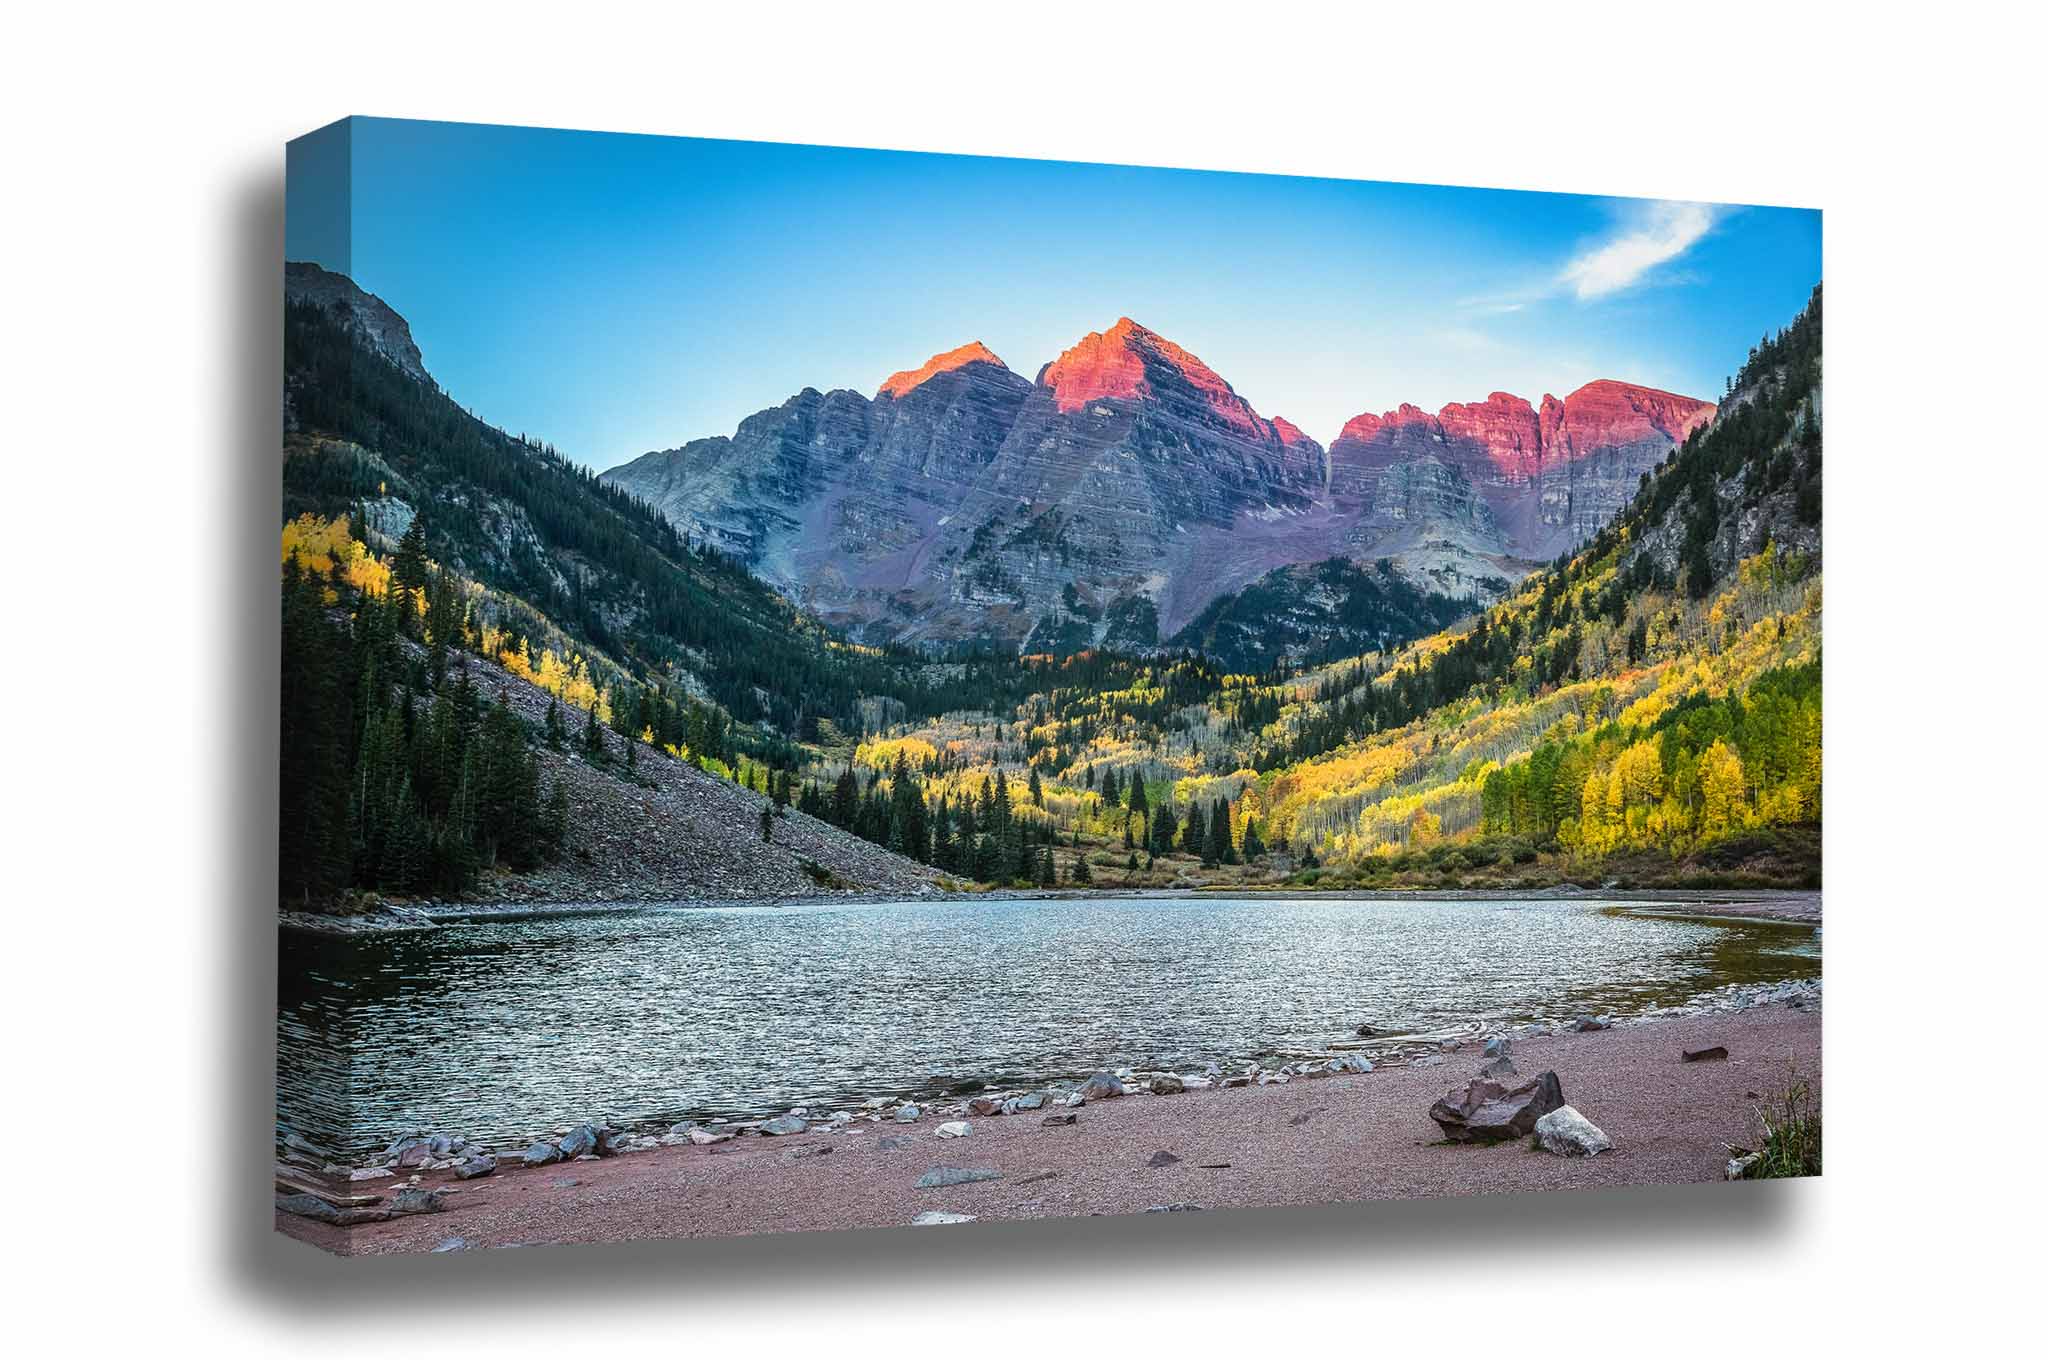 Rocky Mountains canvas wall art of the Maroon Bells with alpenglow on an autumn morning near Aspen, Colorado by Sean Ramsey of Southern Plains Photography.